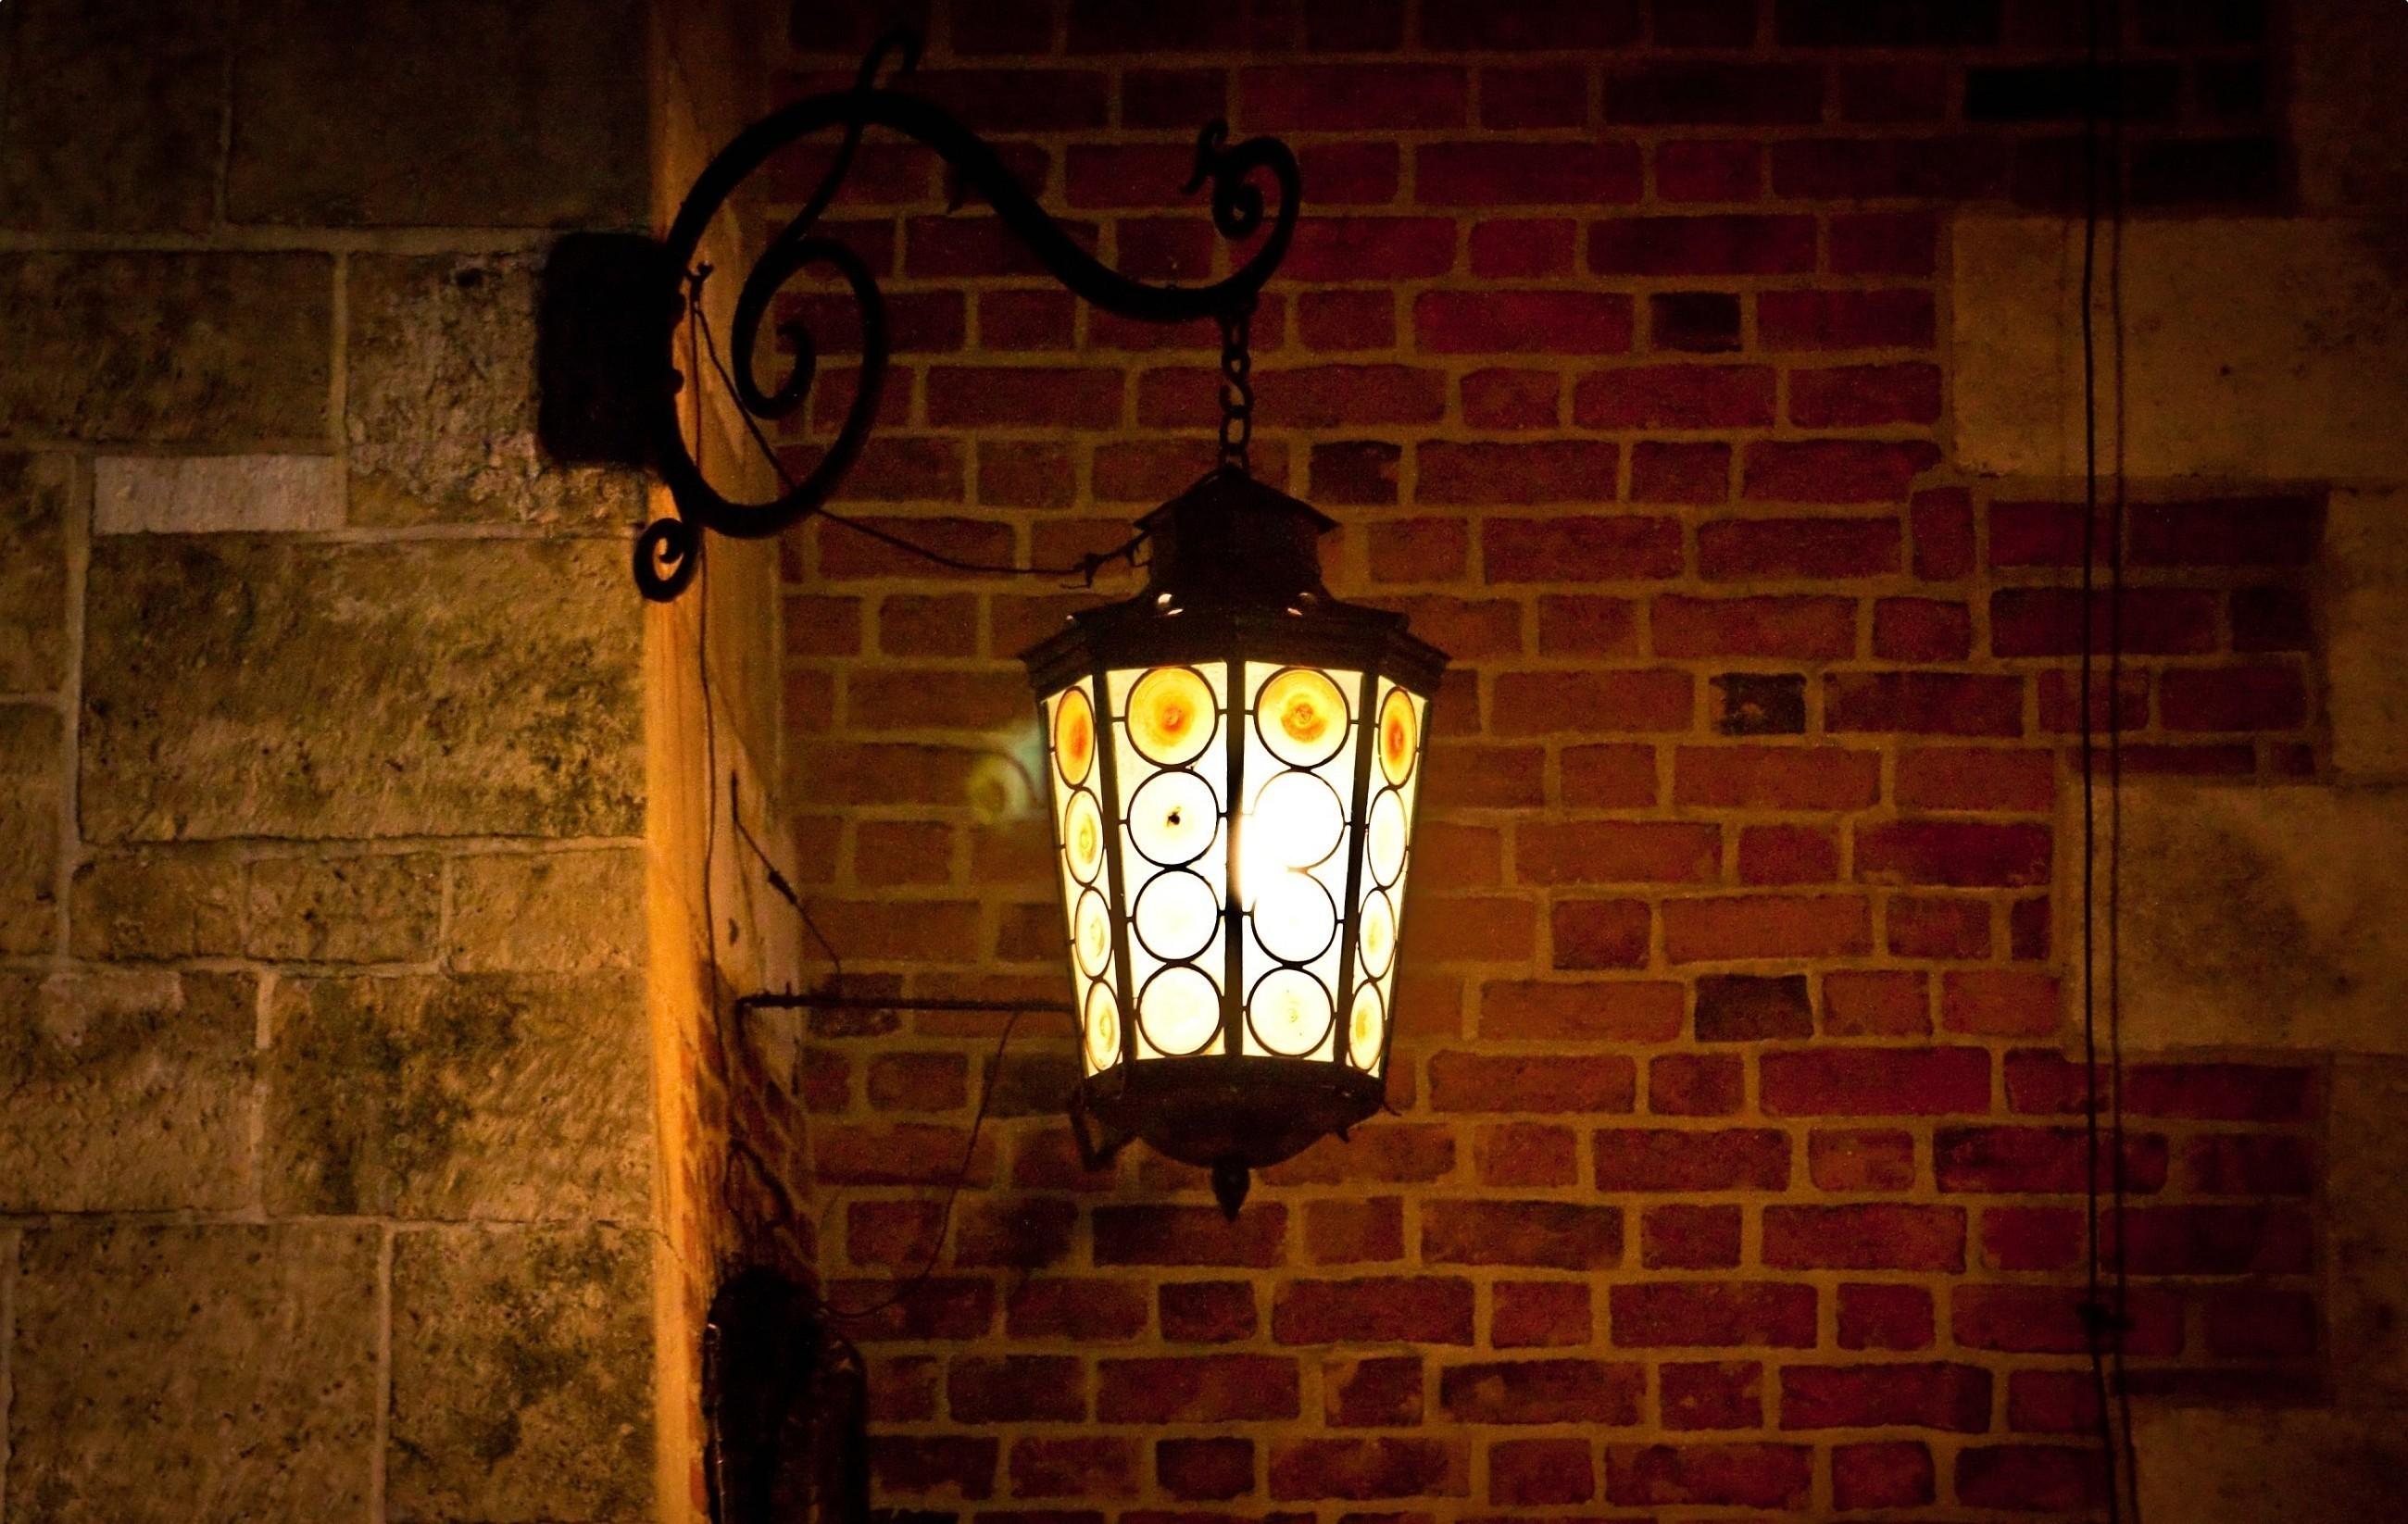 A lamp in the night wallpaper. PC